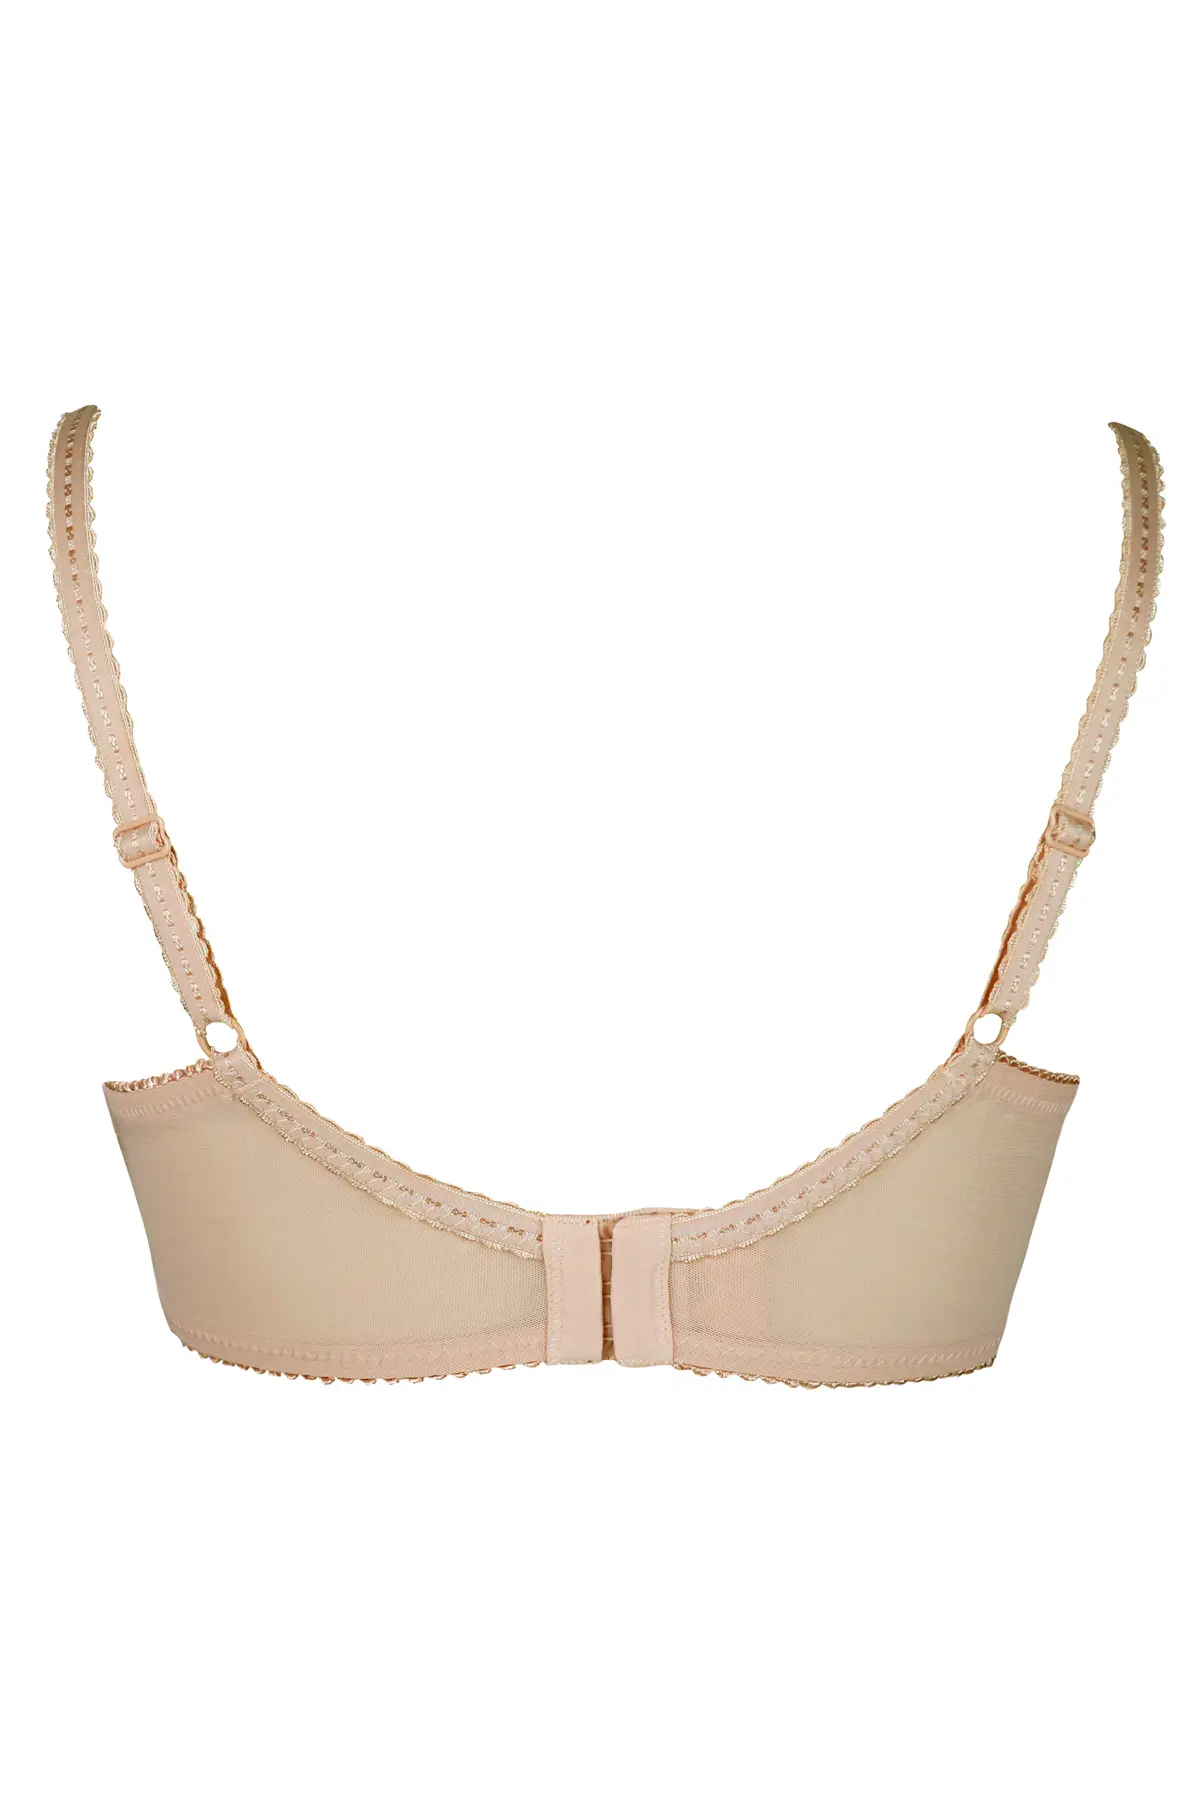 Pour Moi Sofia Embroidered Side Support Bra 34D, Latte at